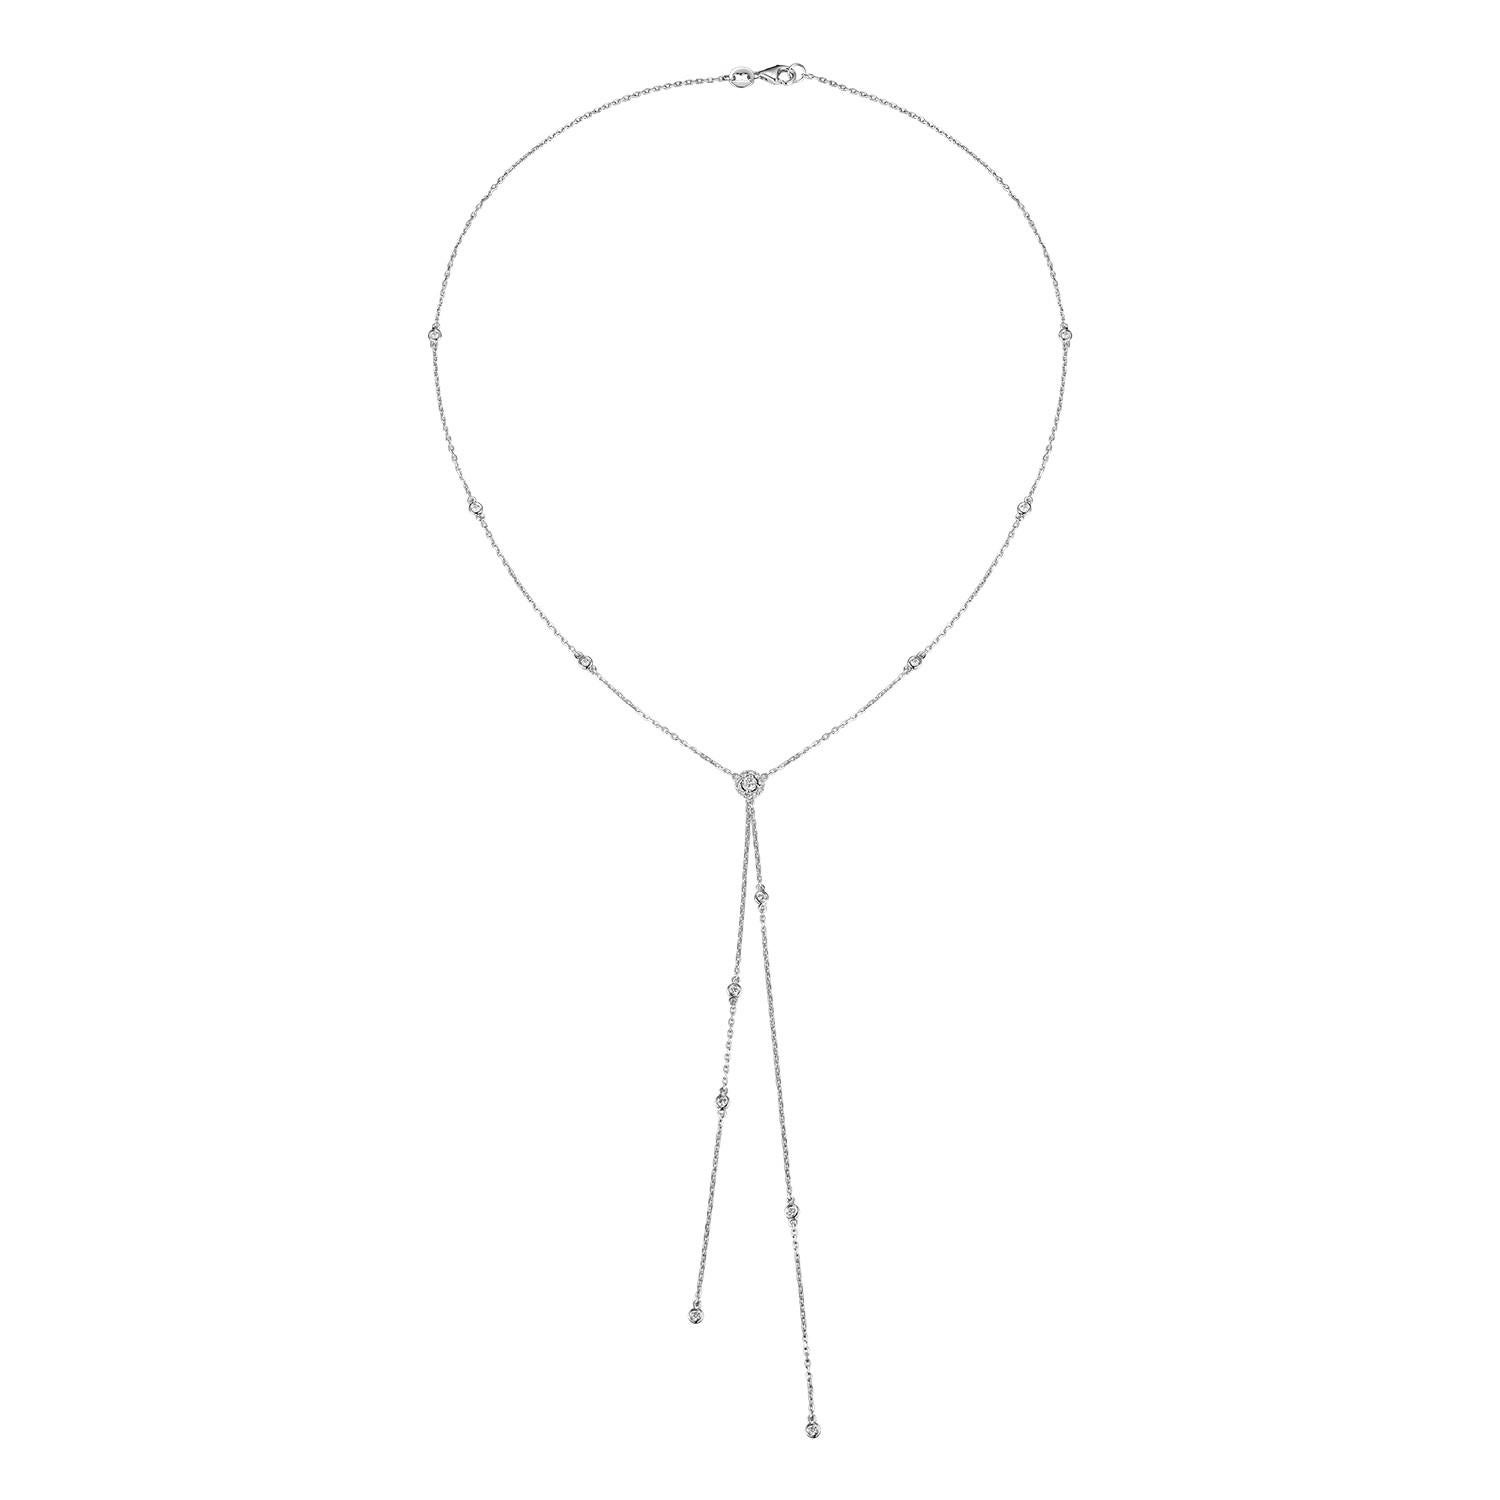 This necklace is a true embodiment of elegance, meticulously crafted from 18K white gold. Its lariat design creates a striking Y-shaped silhouette that gracefully highlights the wearer's décolletage. Embellished with diamonds totaling 0.33 carats,